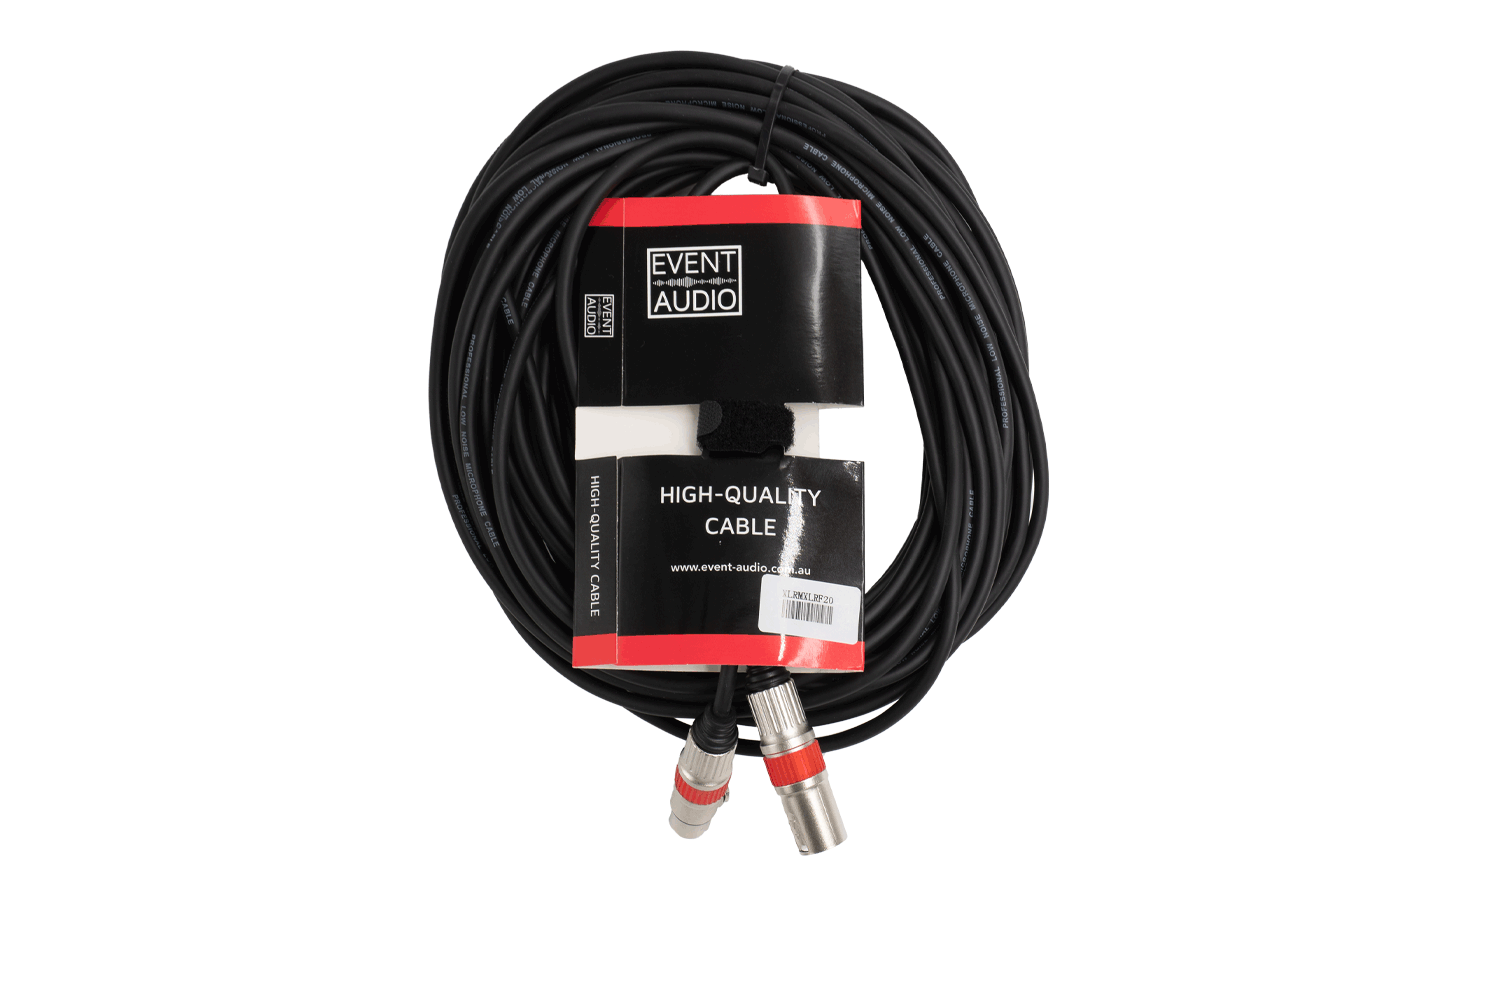 Event Audio XLRMXLRF20 - 20m XLR 3 Pin Male to Female Signal Lead - Red Ring packaged product 